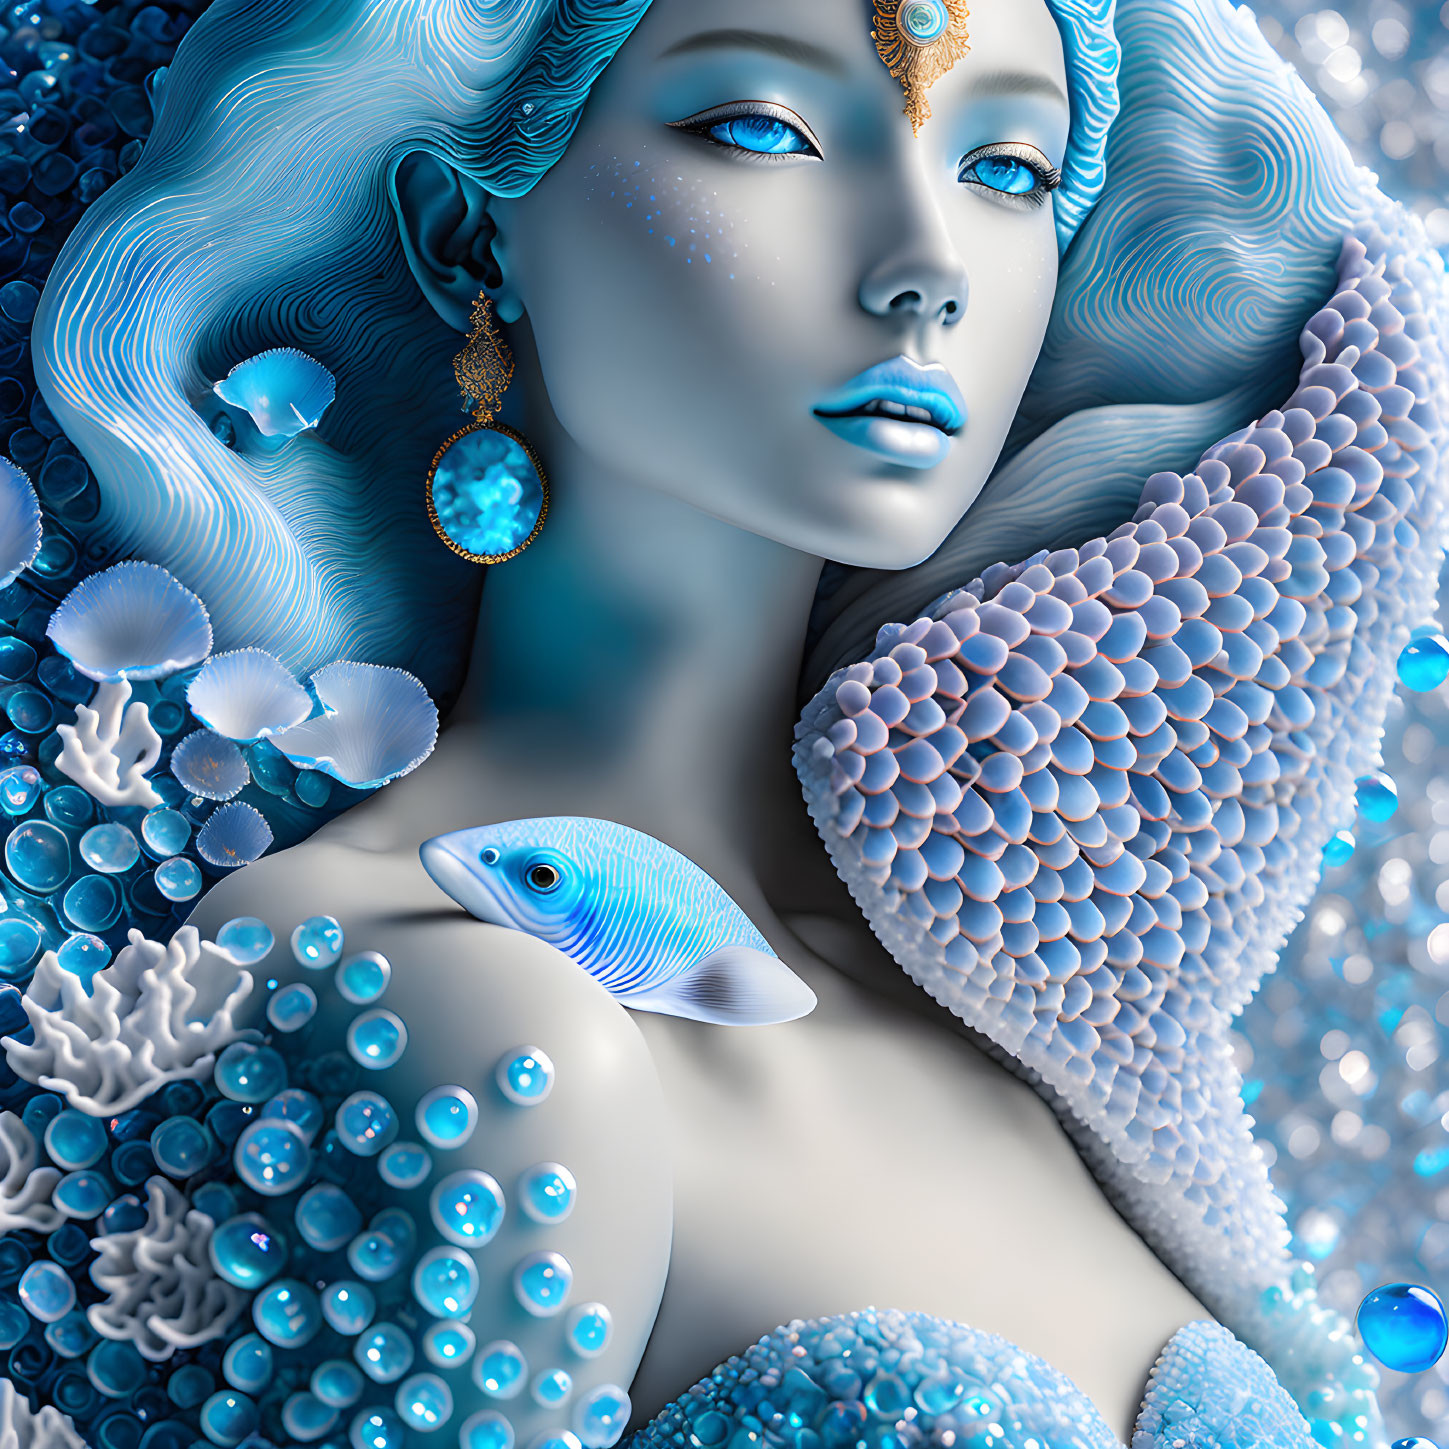 Blue-hued image of a woman with oceanic features and aquatic life, coral, fish, intricate